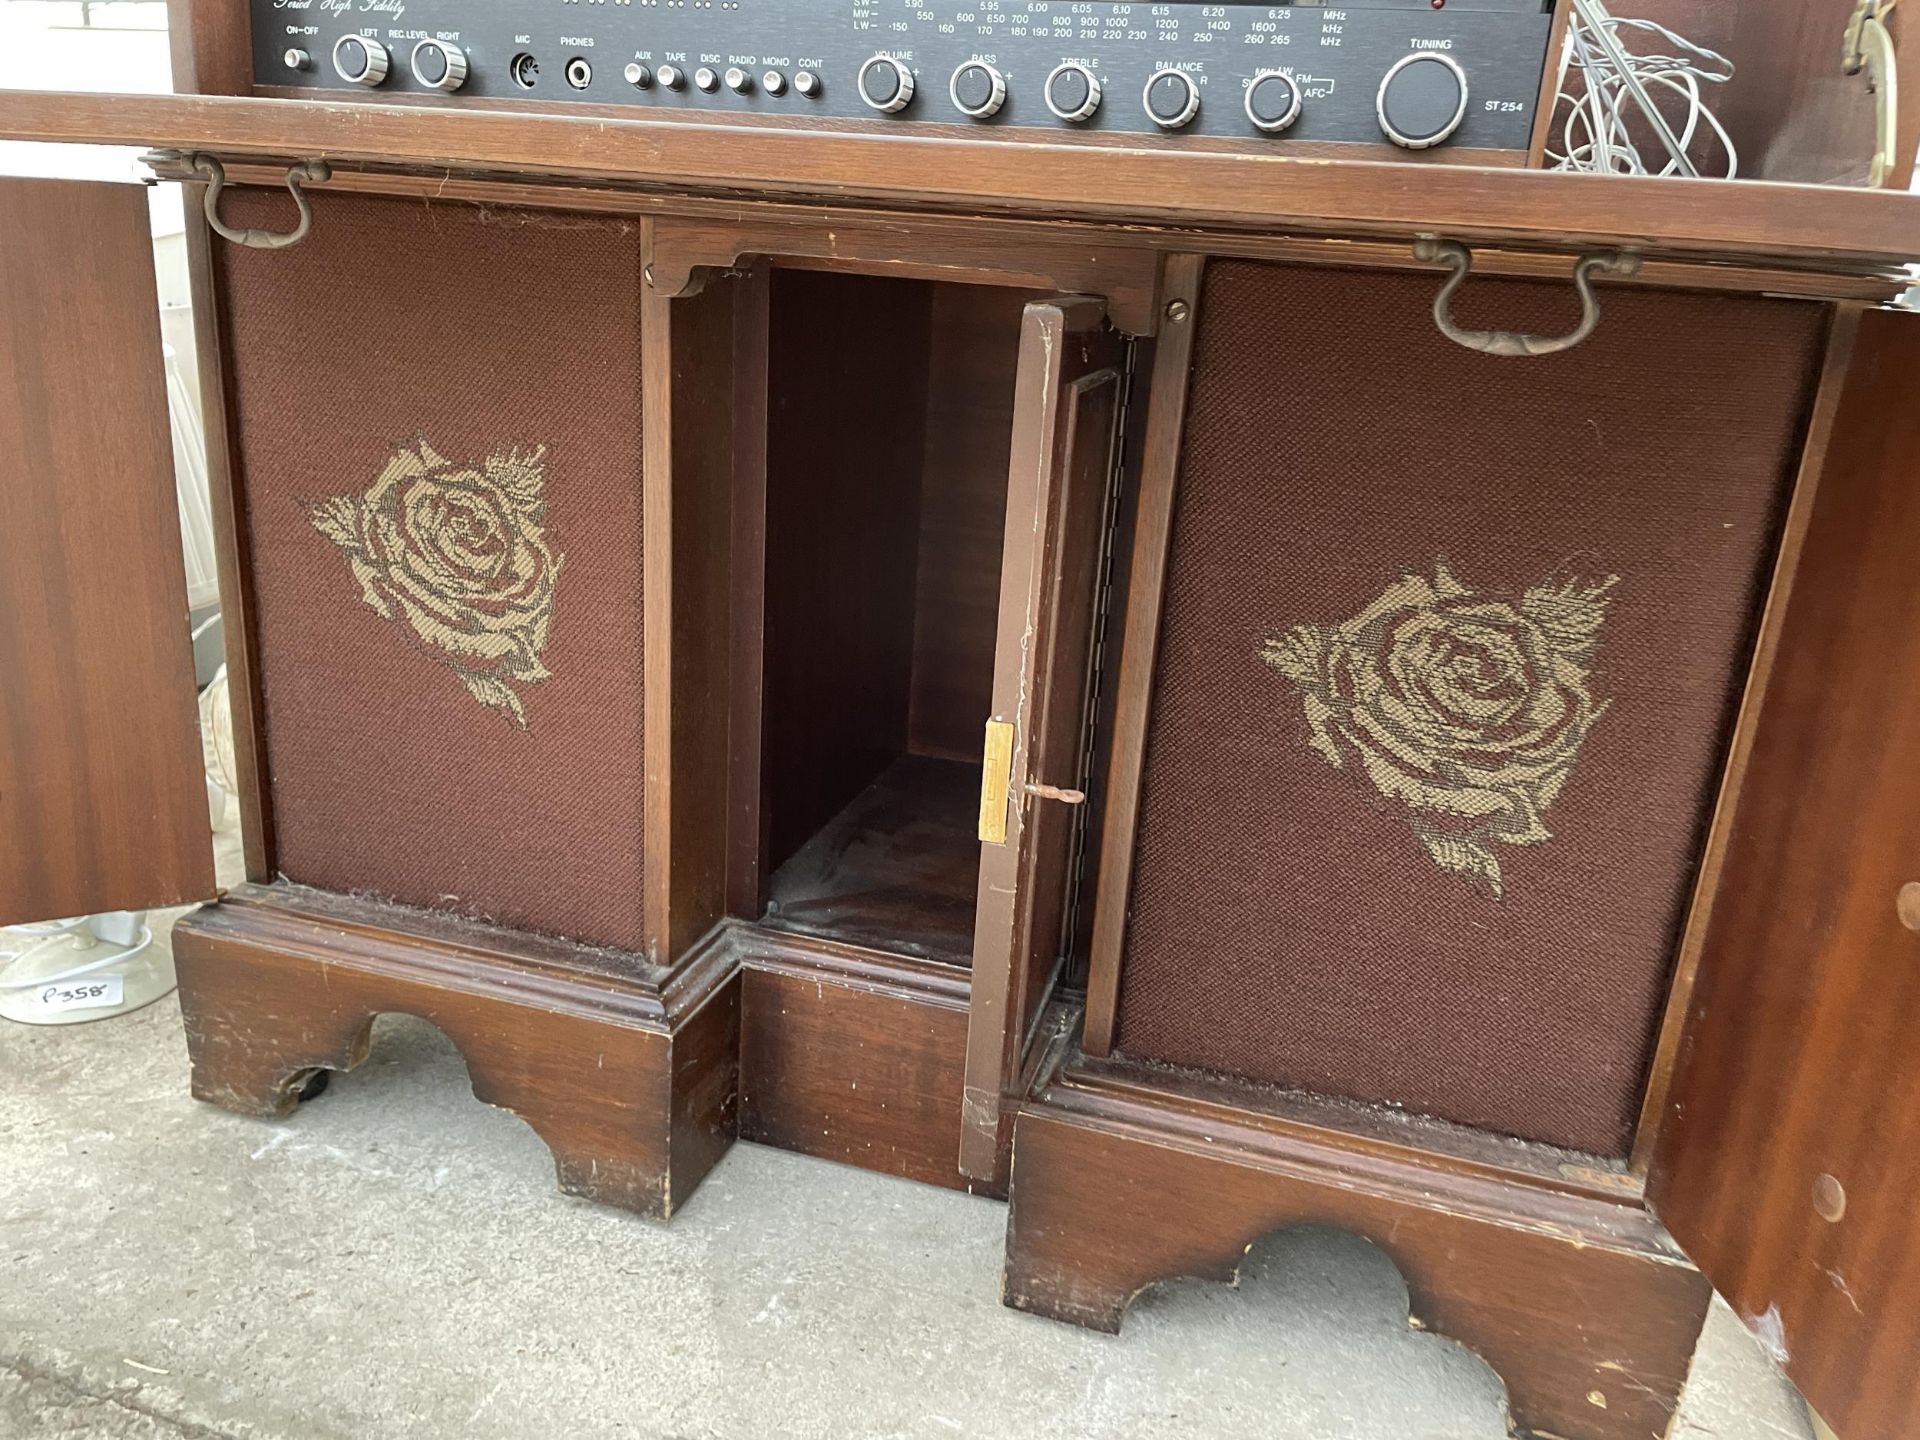 A WOODEN STEREO CABINET WITH SPEAKERS AND A GARRARD RECORD DECK - Image 4 of 4